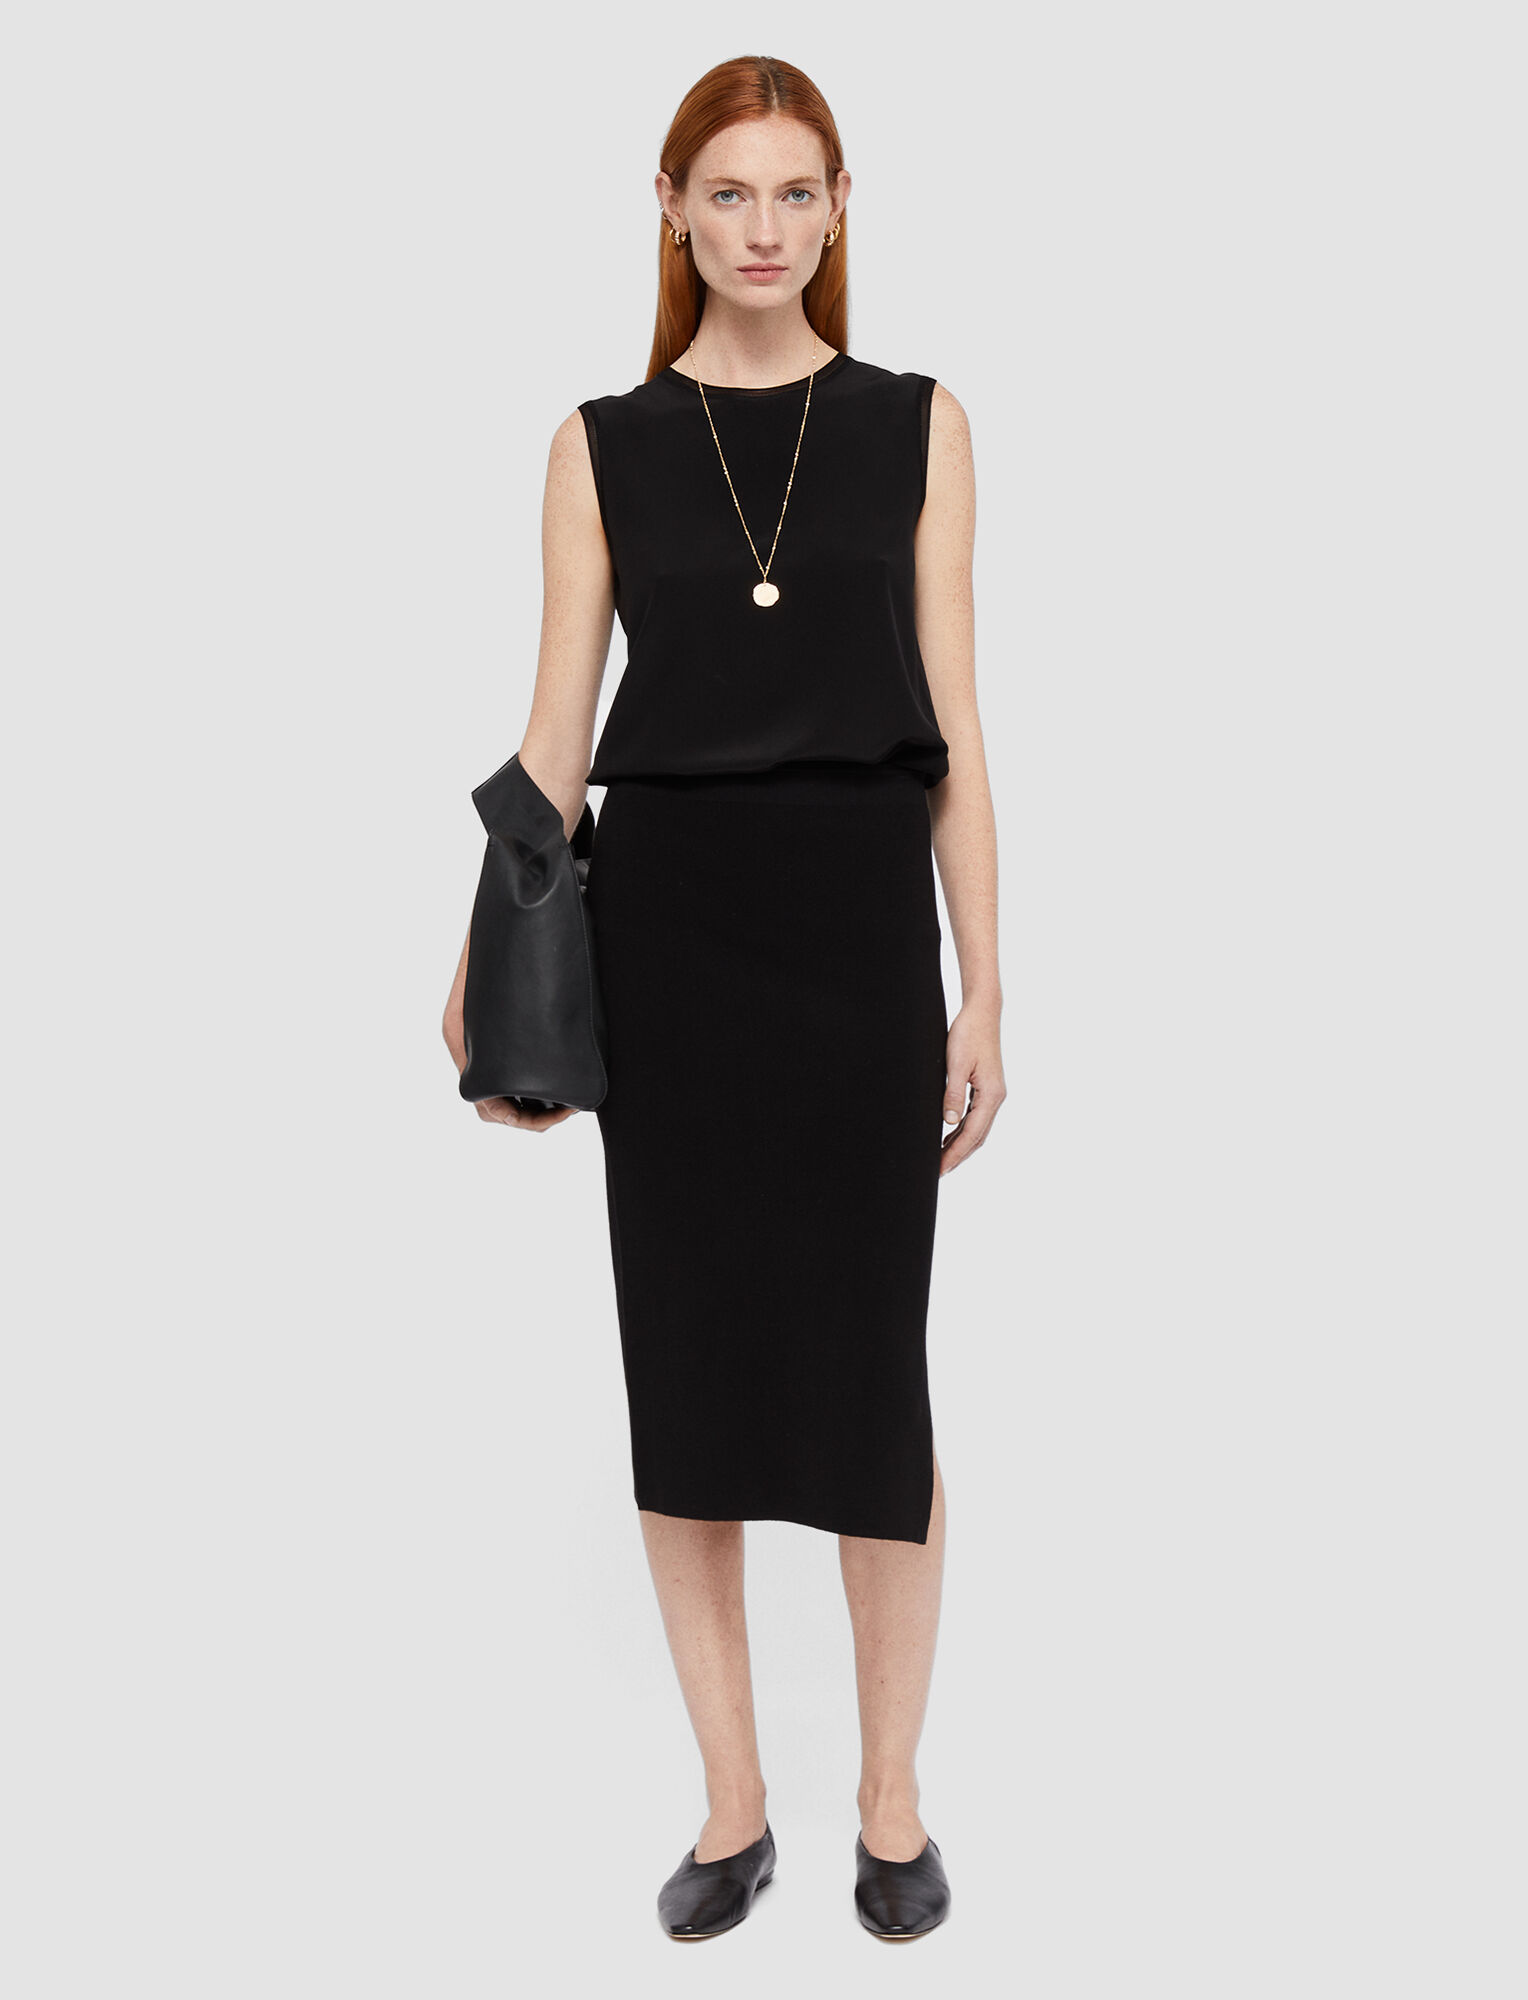 Classic pencil skirt in black with back zip